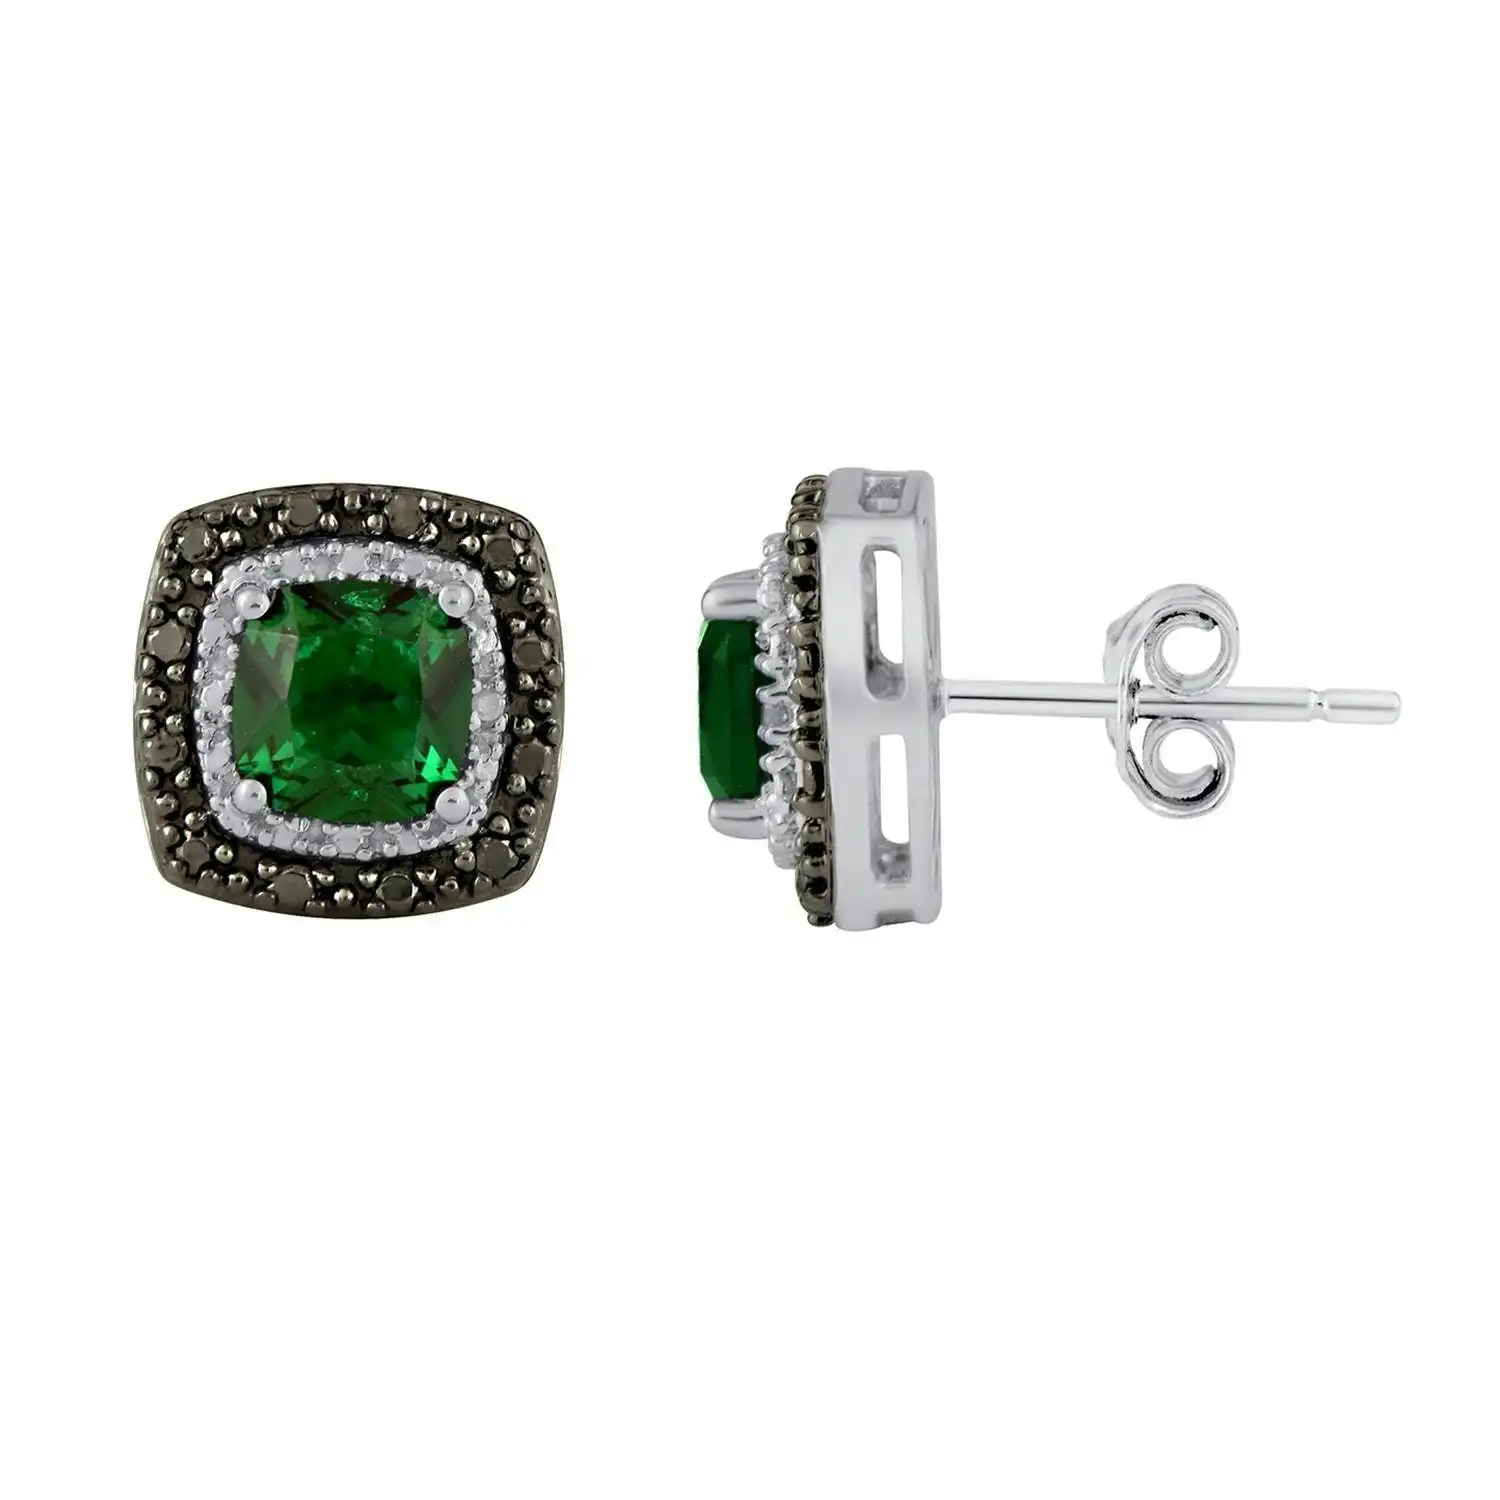 Mirage Created Emerald and Black Diamond Set Stud Earrings in Sterling Silver